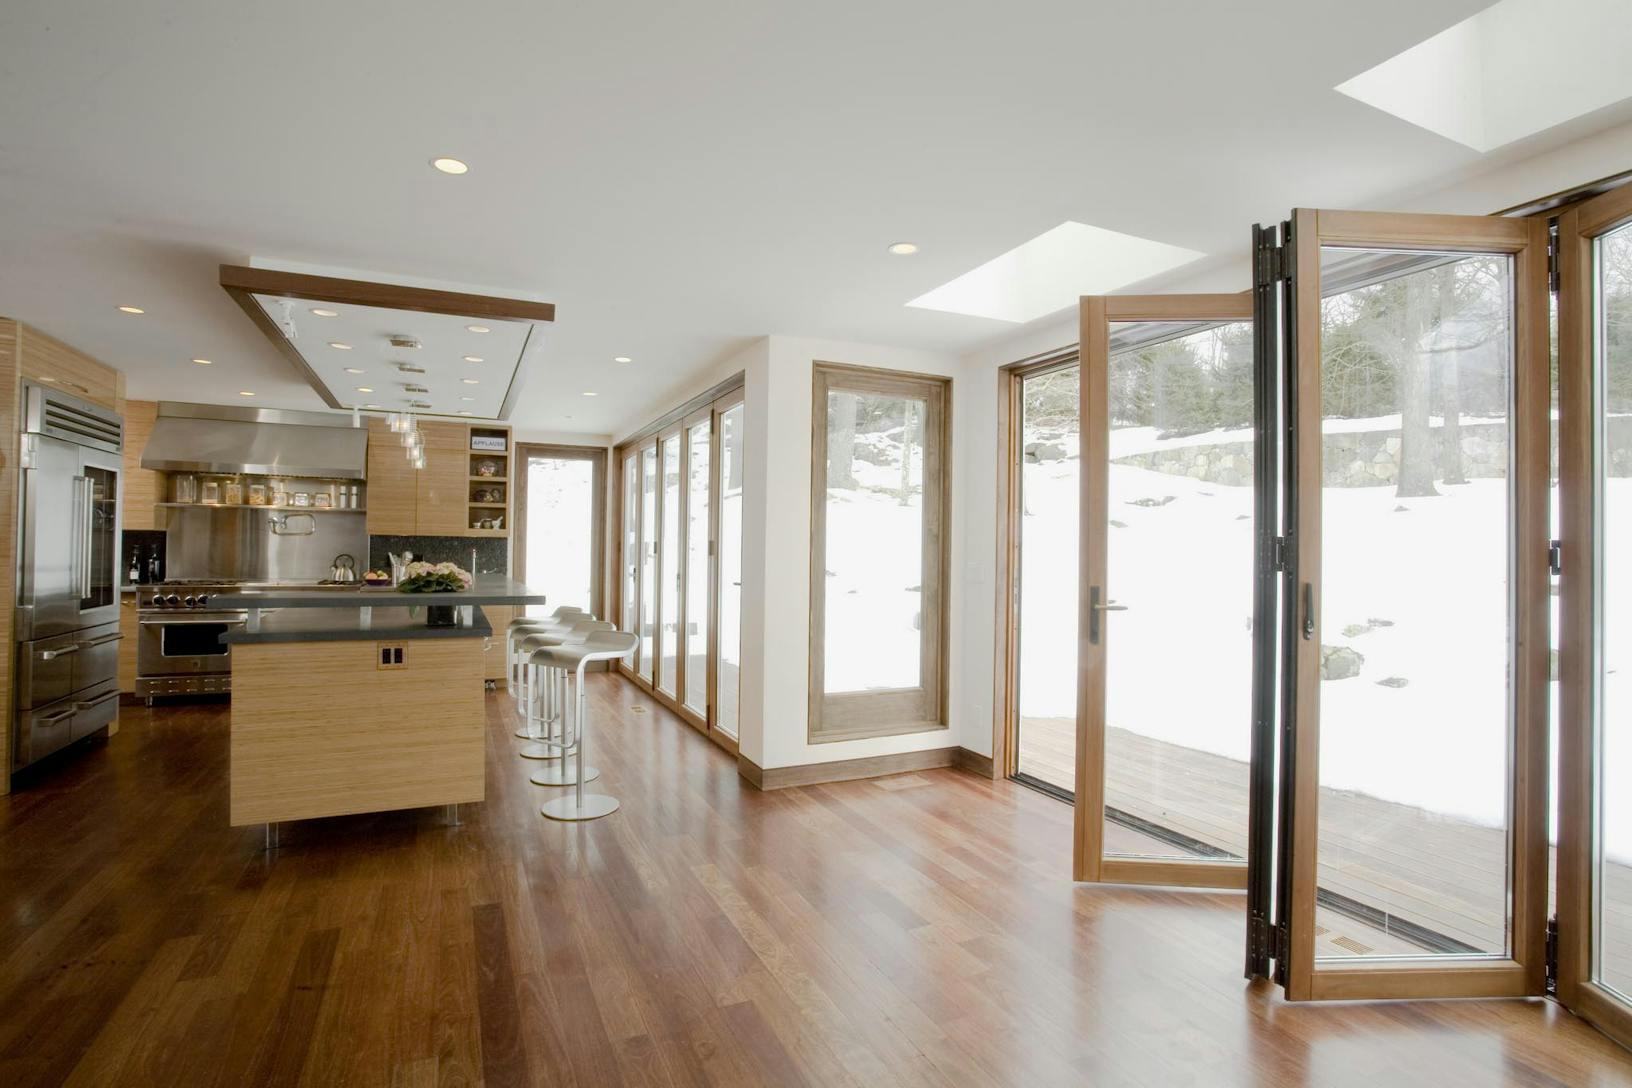 Modern open kitchen layout with island and folding patio doors